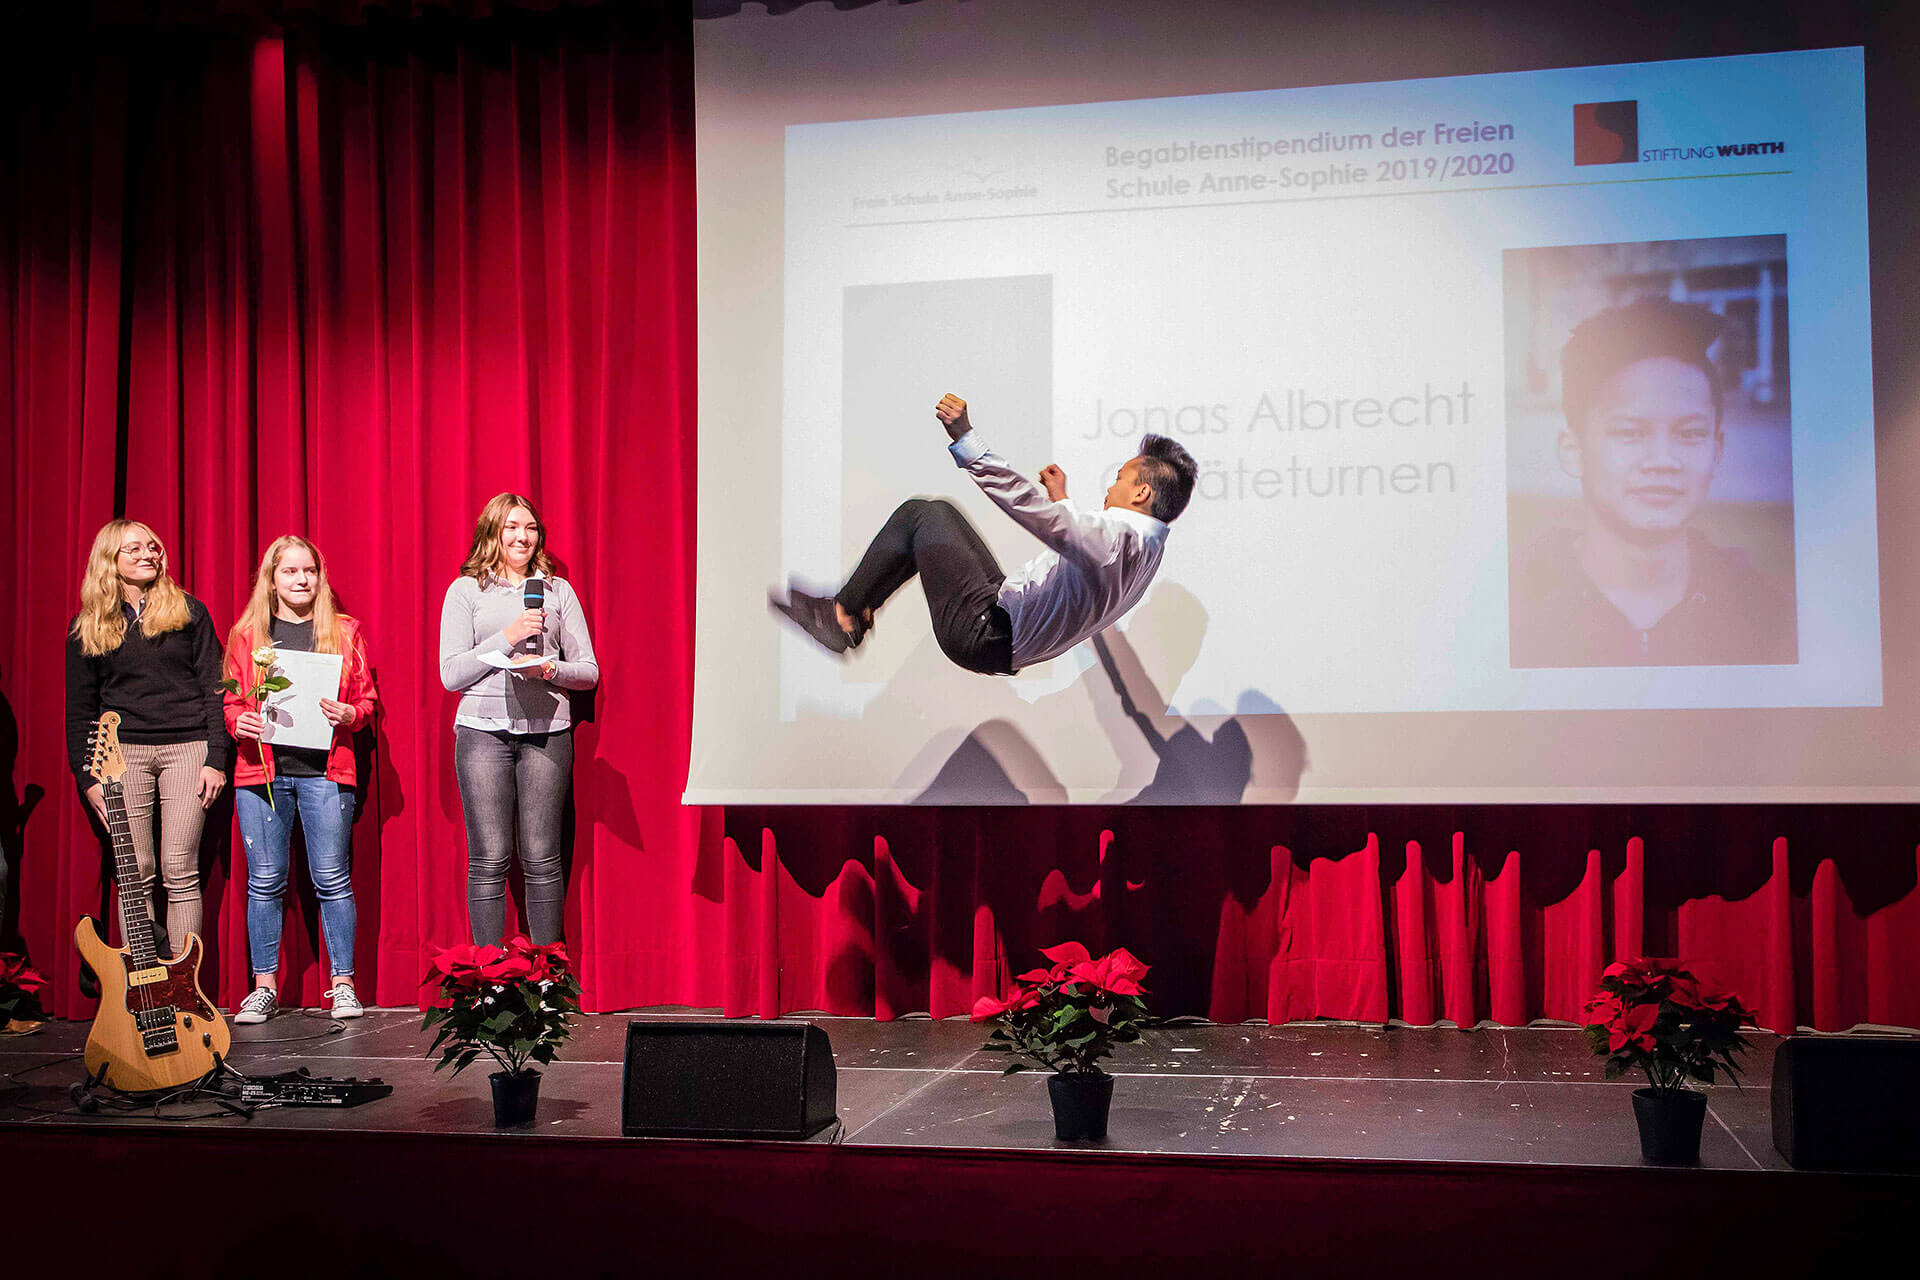 Talents are promoted: Junior gymnast Jonas Albrecht from  Freie Schule Anne-Sophie did a spontaneous backflip when he received one of eleven gifted scholarships worth EUR 1,000 for  the 2019/20 school year.